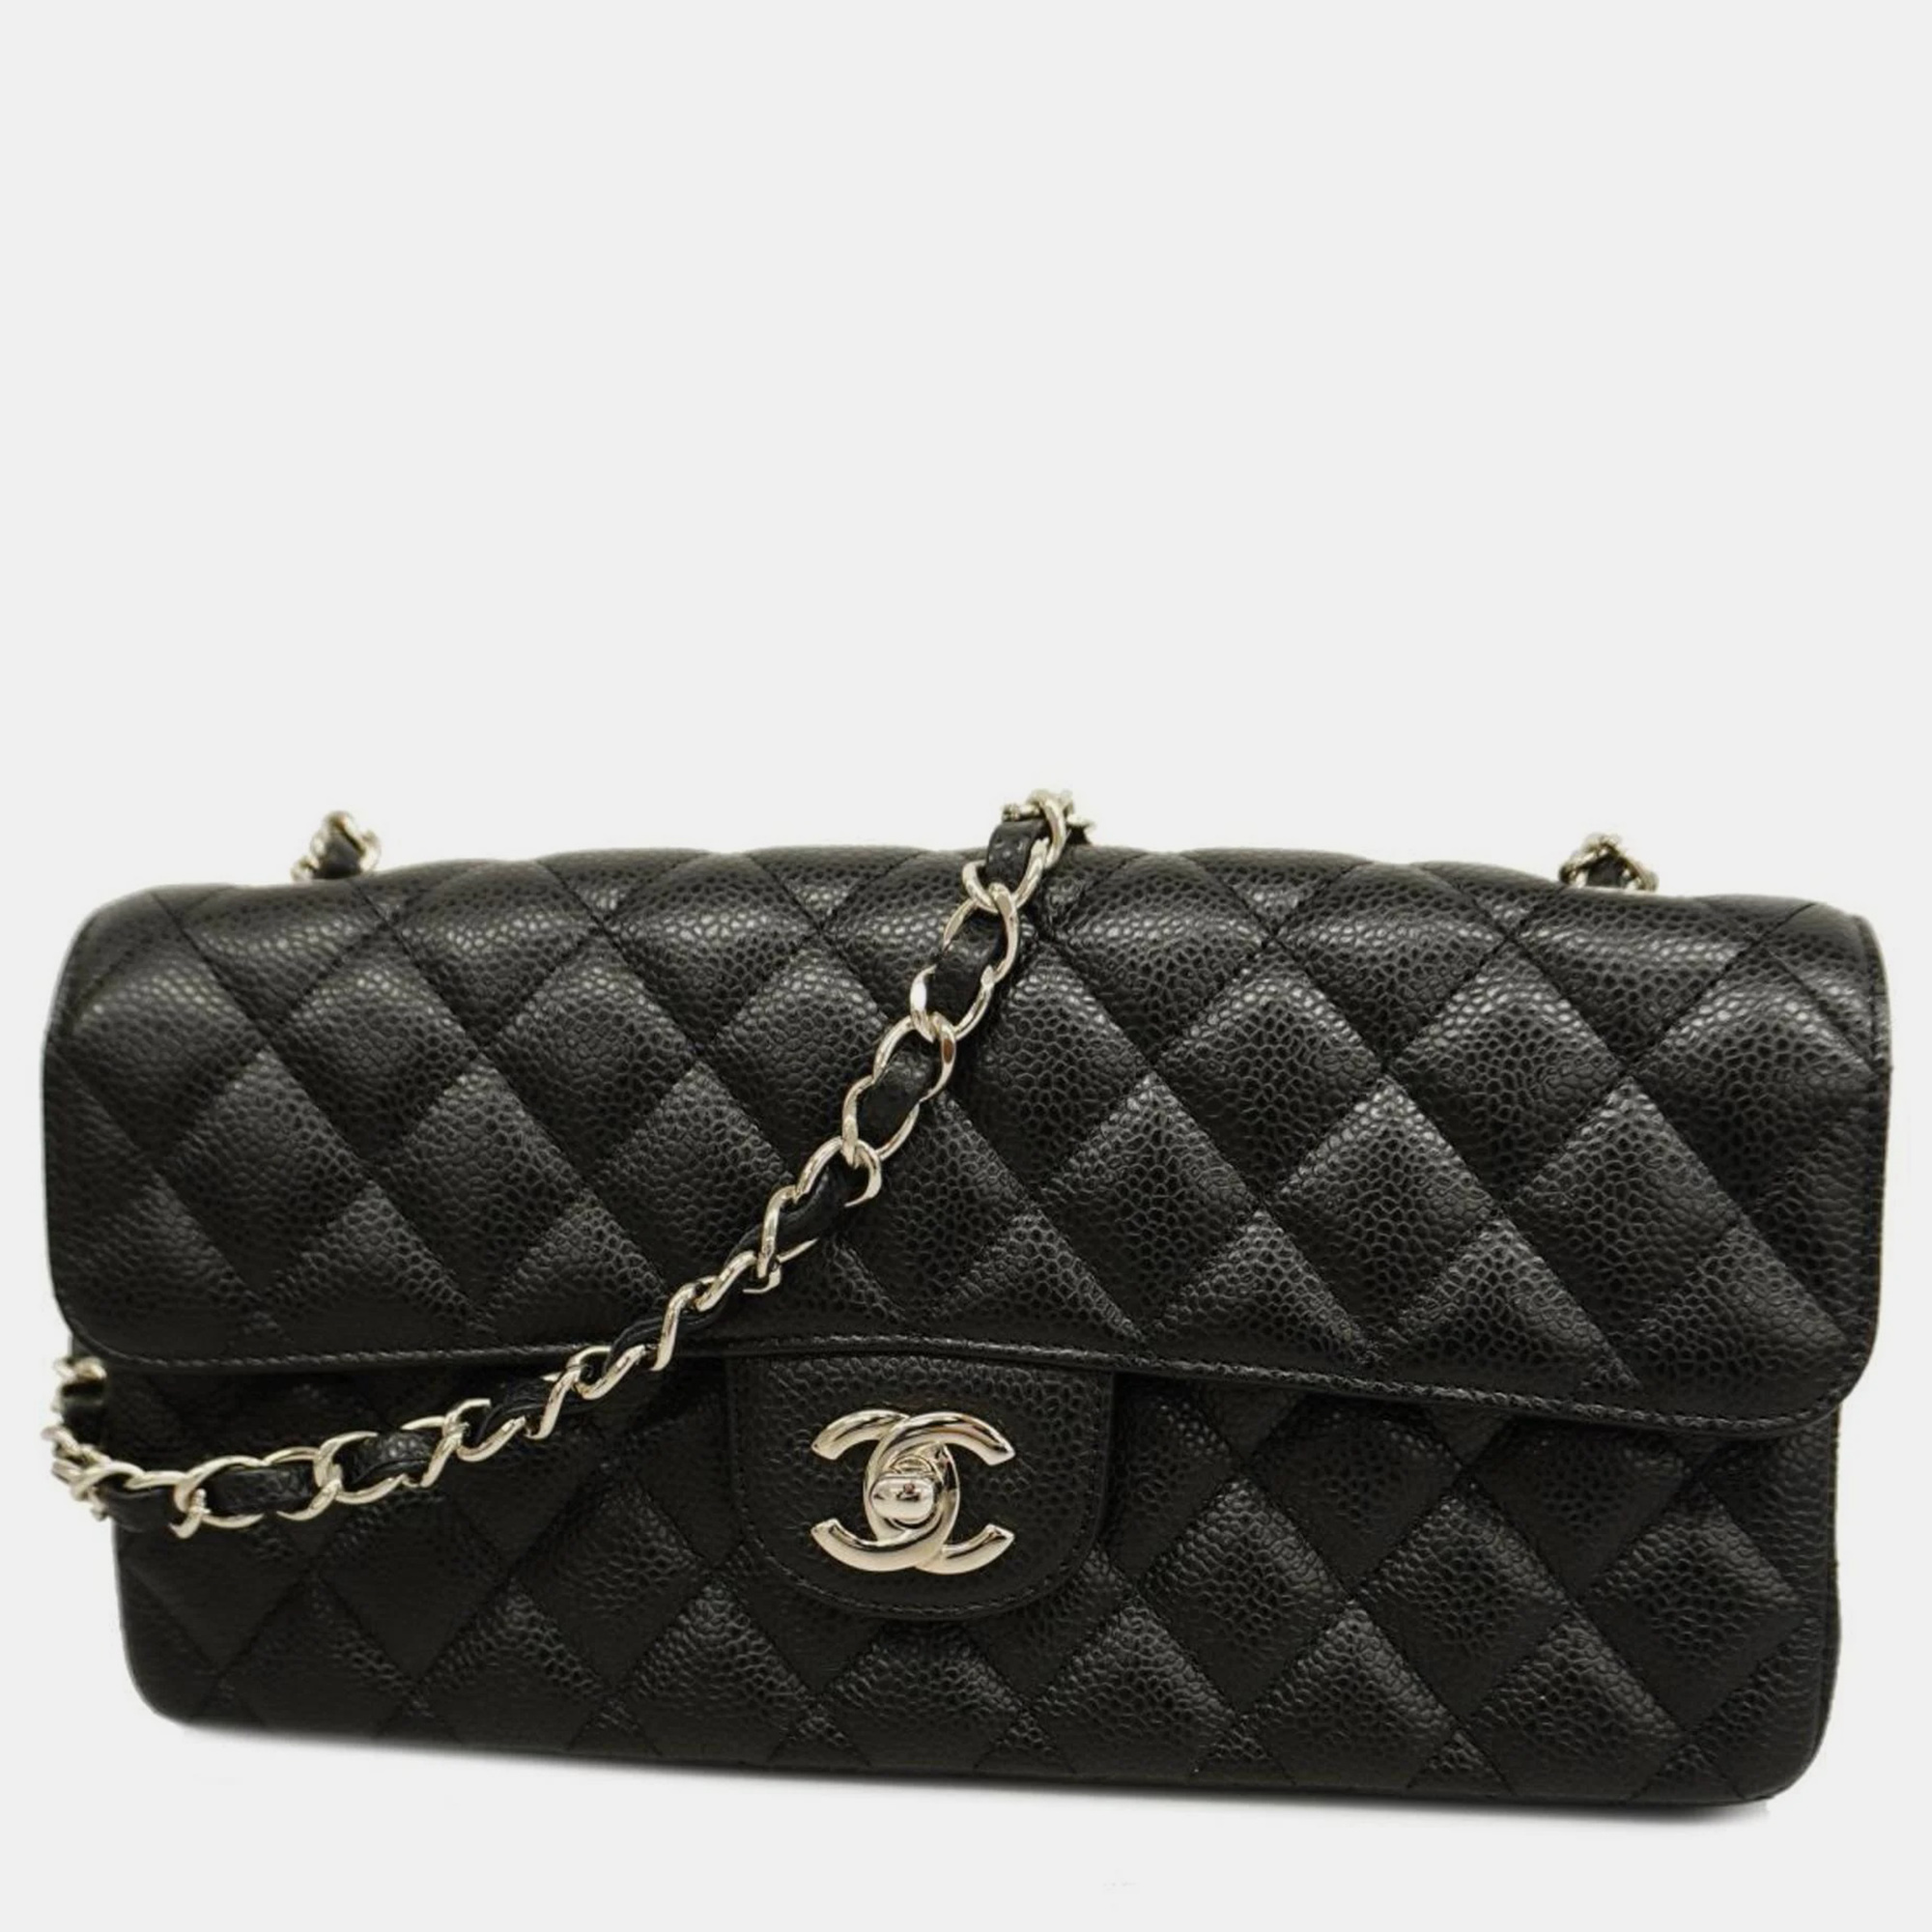 Chanel  caviar leather  east-west satchels